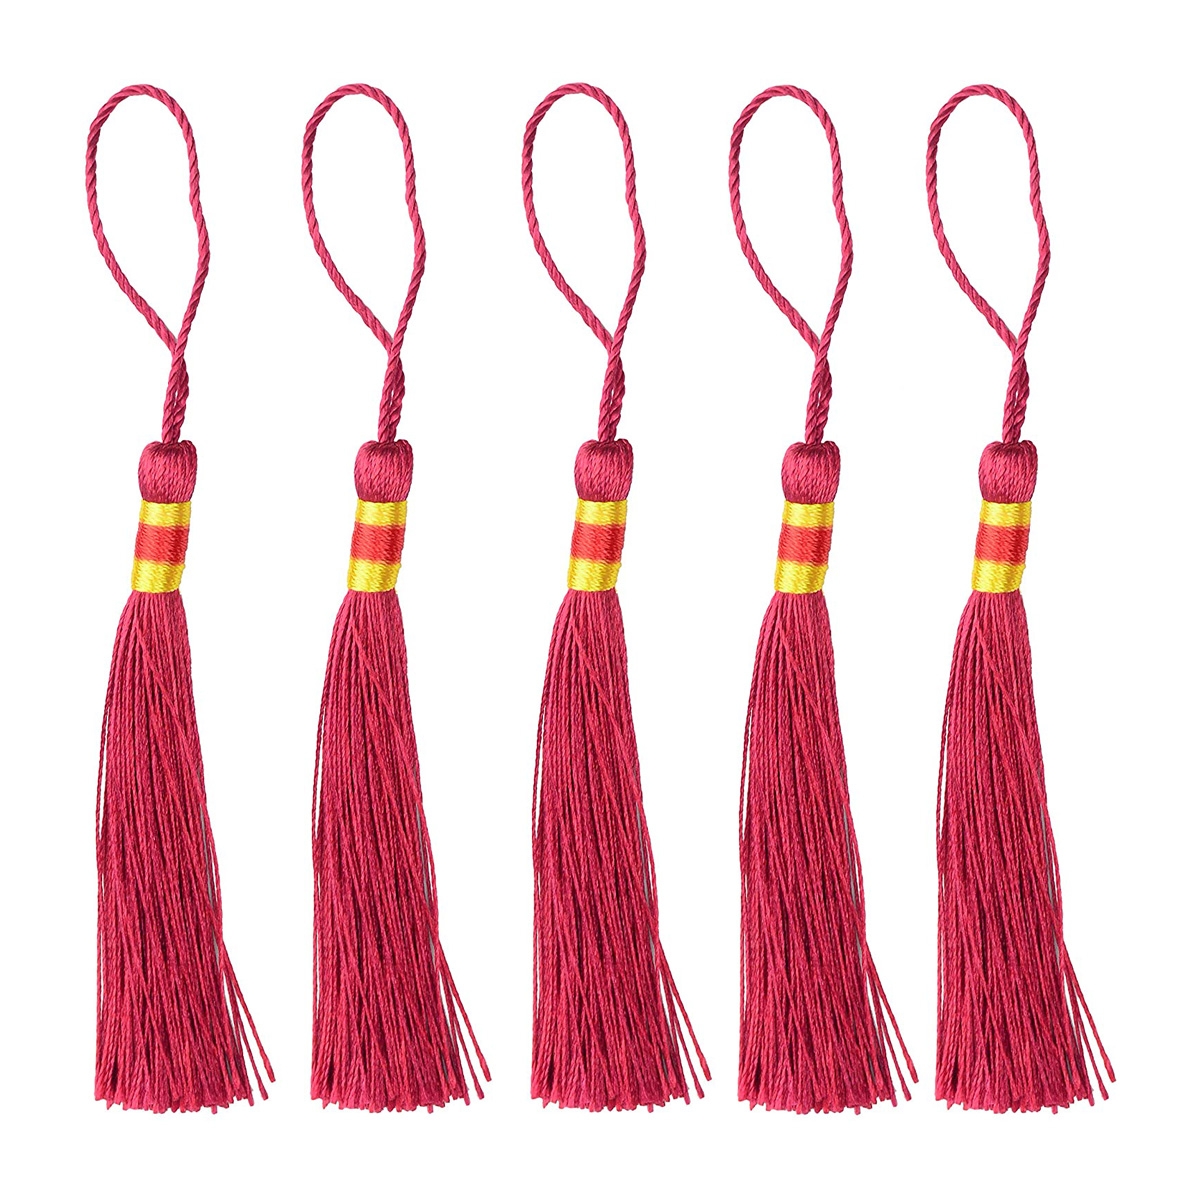 Tassels with Cord Loop and Small Chinese Knot for Jewelry Making, Souvenir, Bookmarks, DIY Craft Acc